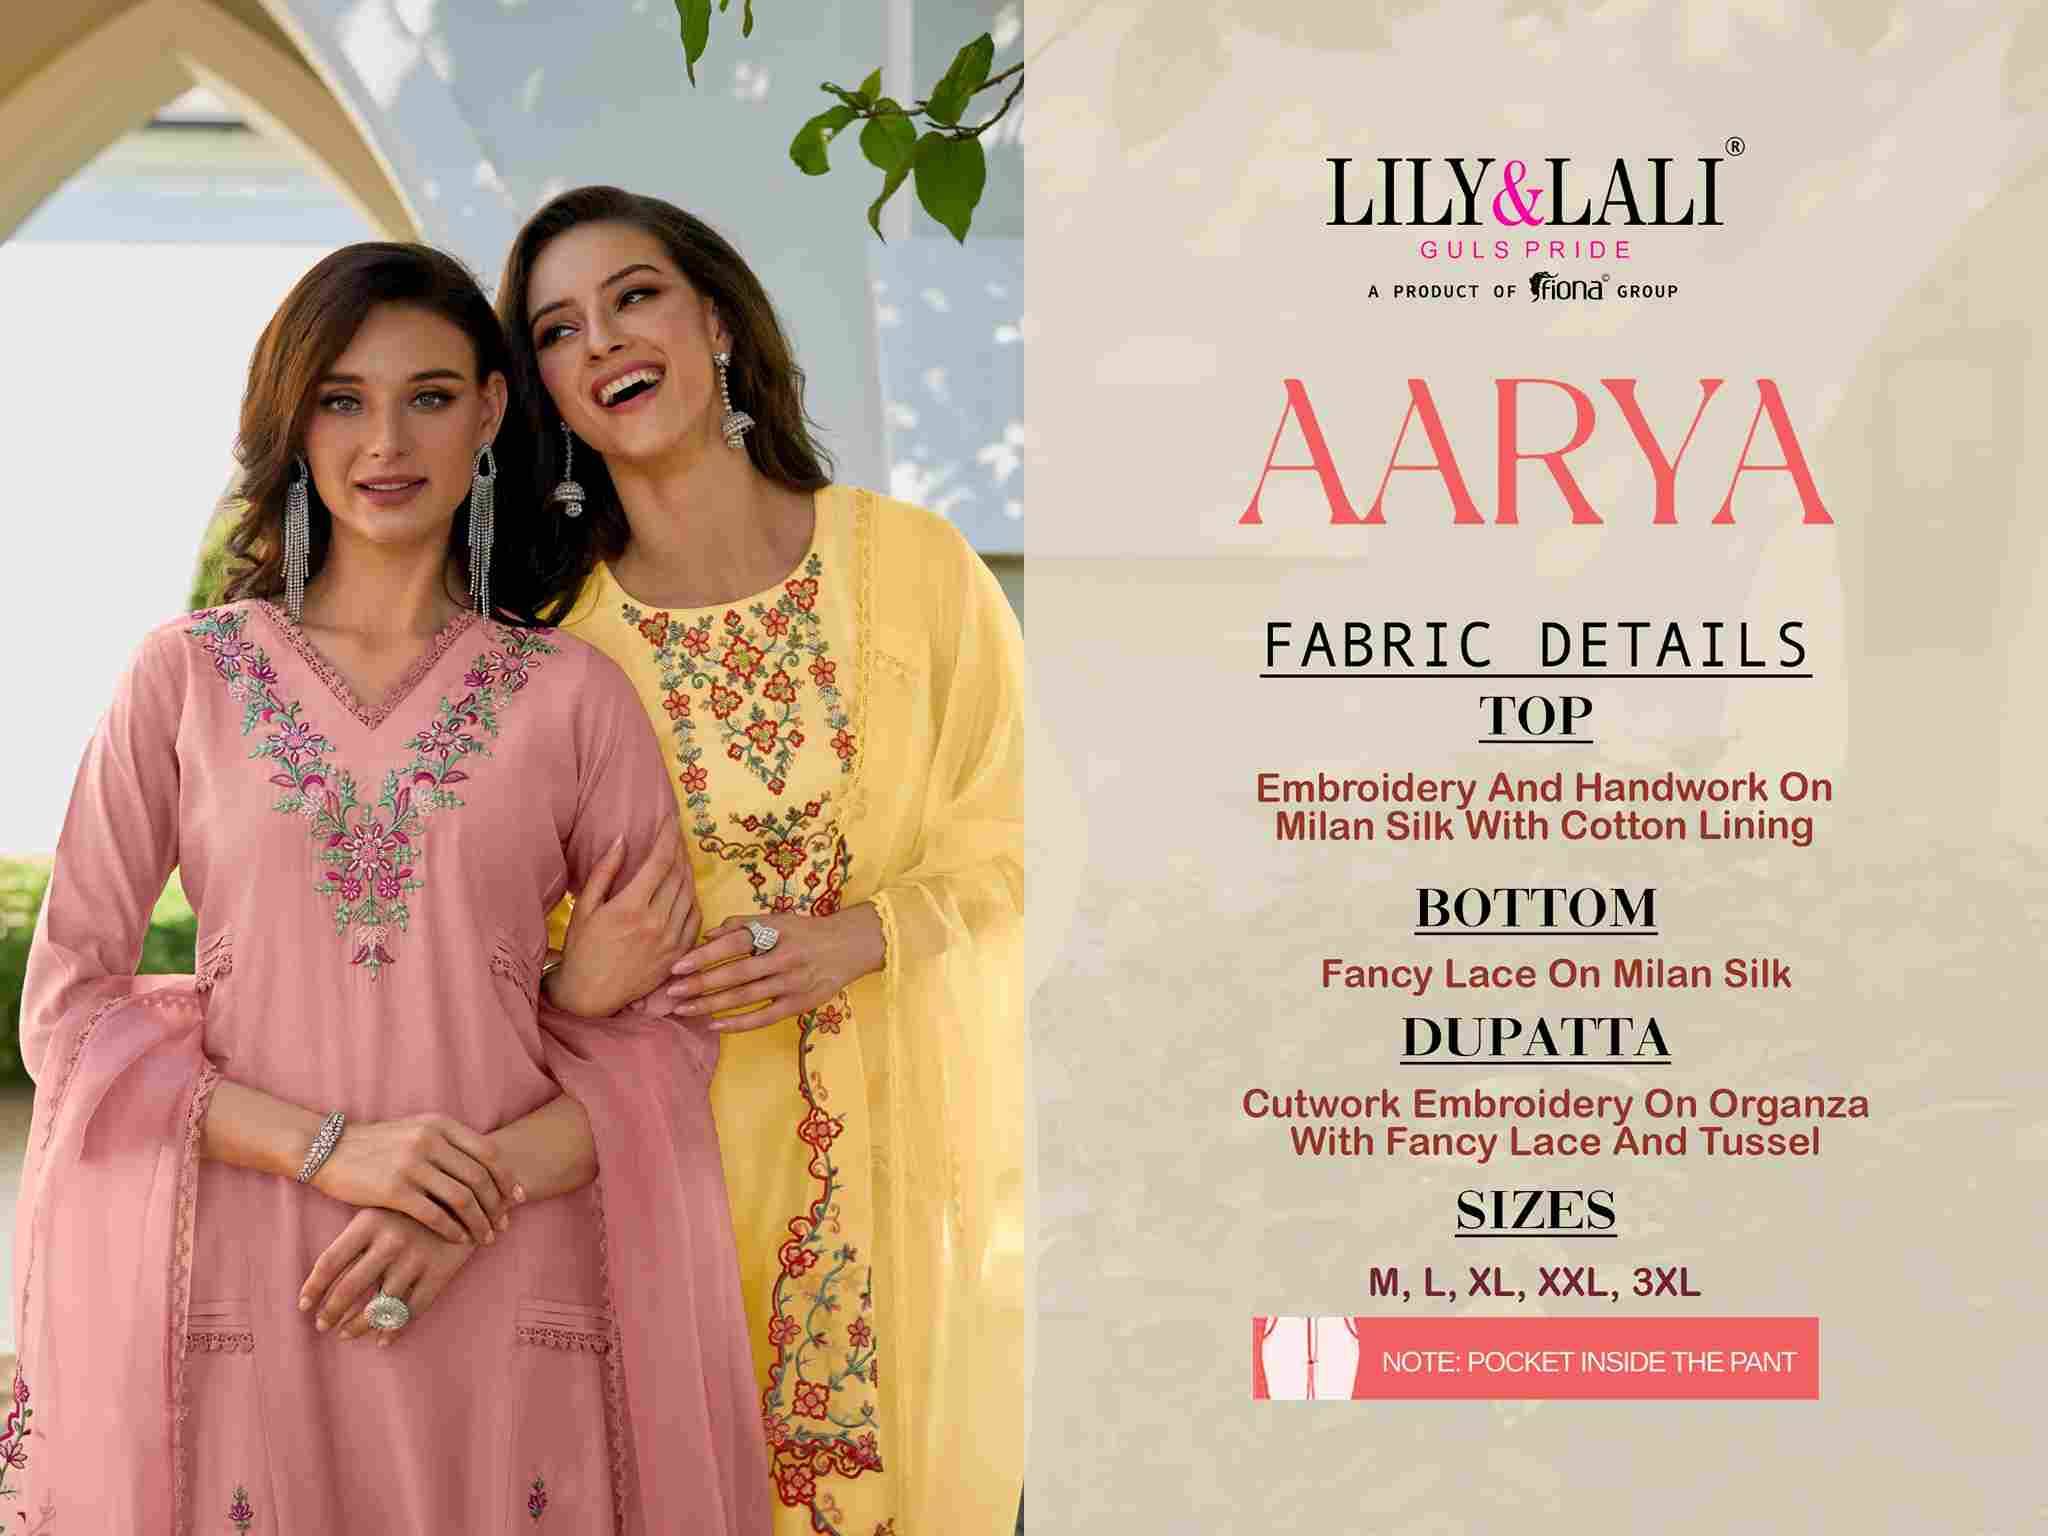 Aarya By Lily And Lali 16201 To 16206 Series Beautiful Festive Suits Stylish Colorful Fancy Casual Wear & Ethnic Wear Muslin Silk Dresses At Wholesale Price